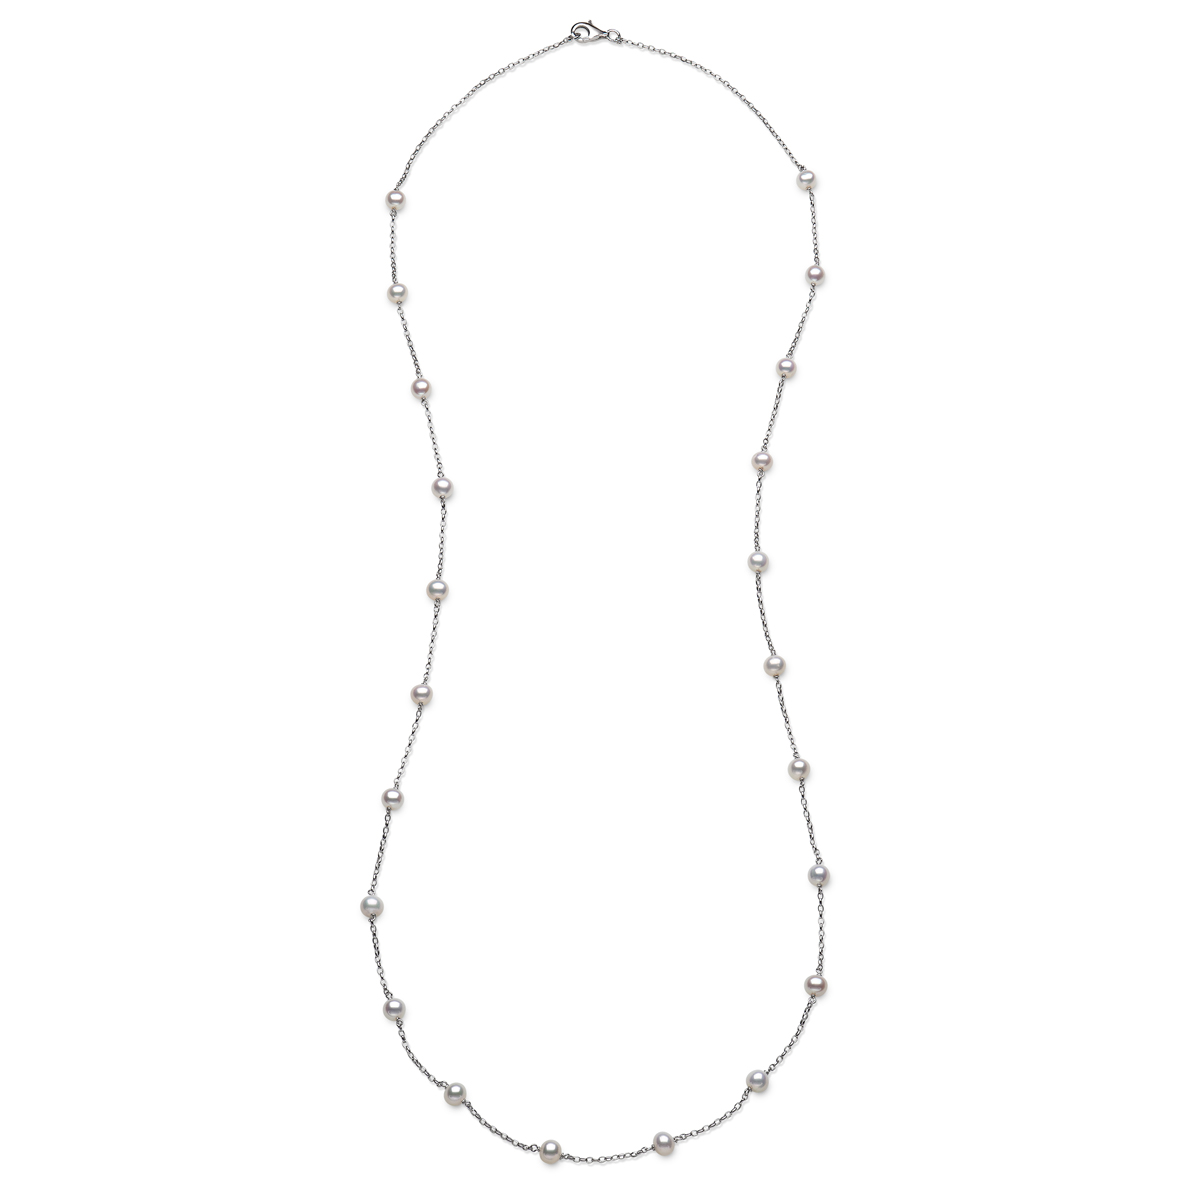 Sterling Silver Tincup Pearl Necklace On An Oval Link Chain Measuring 36